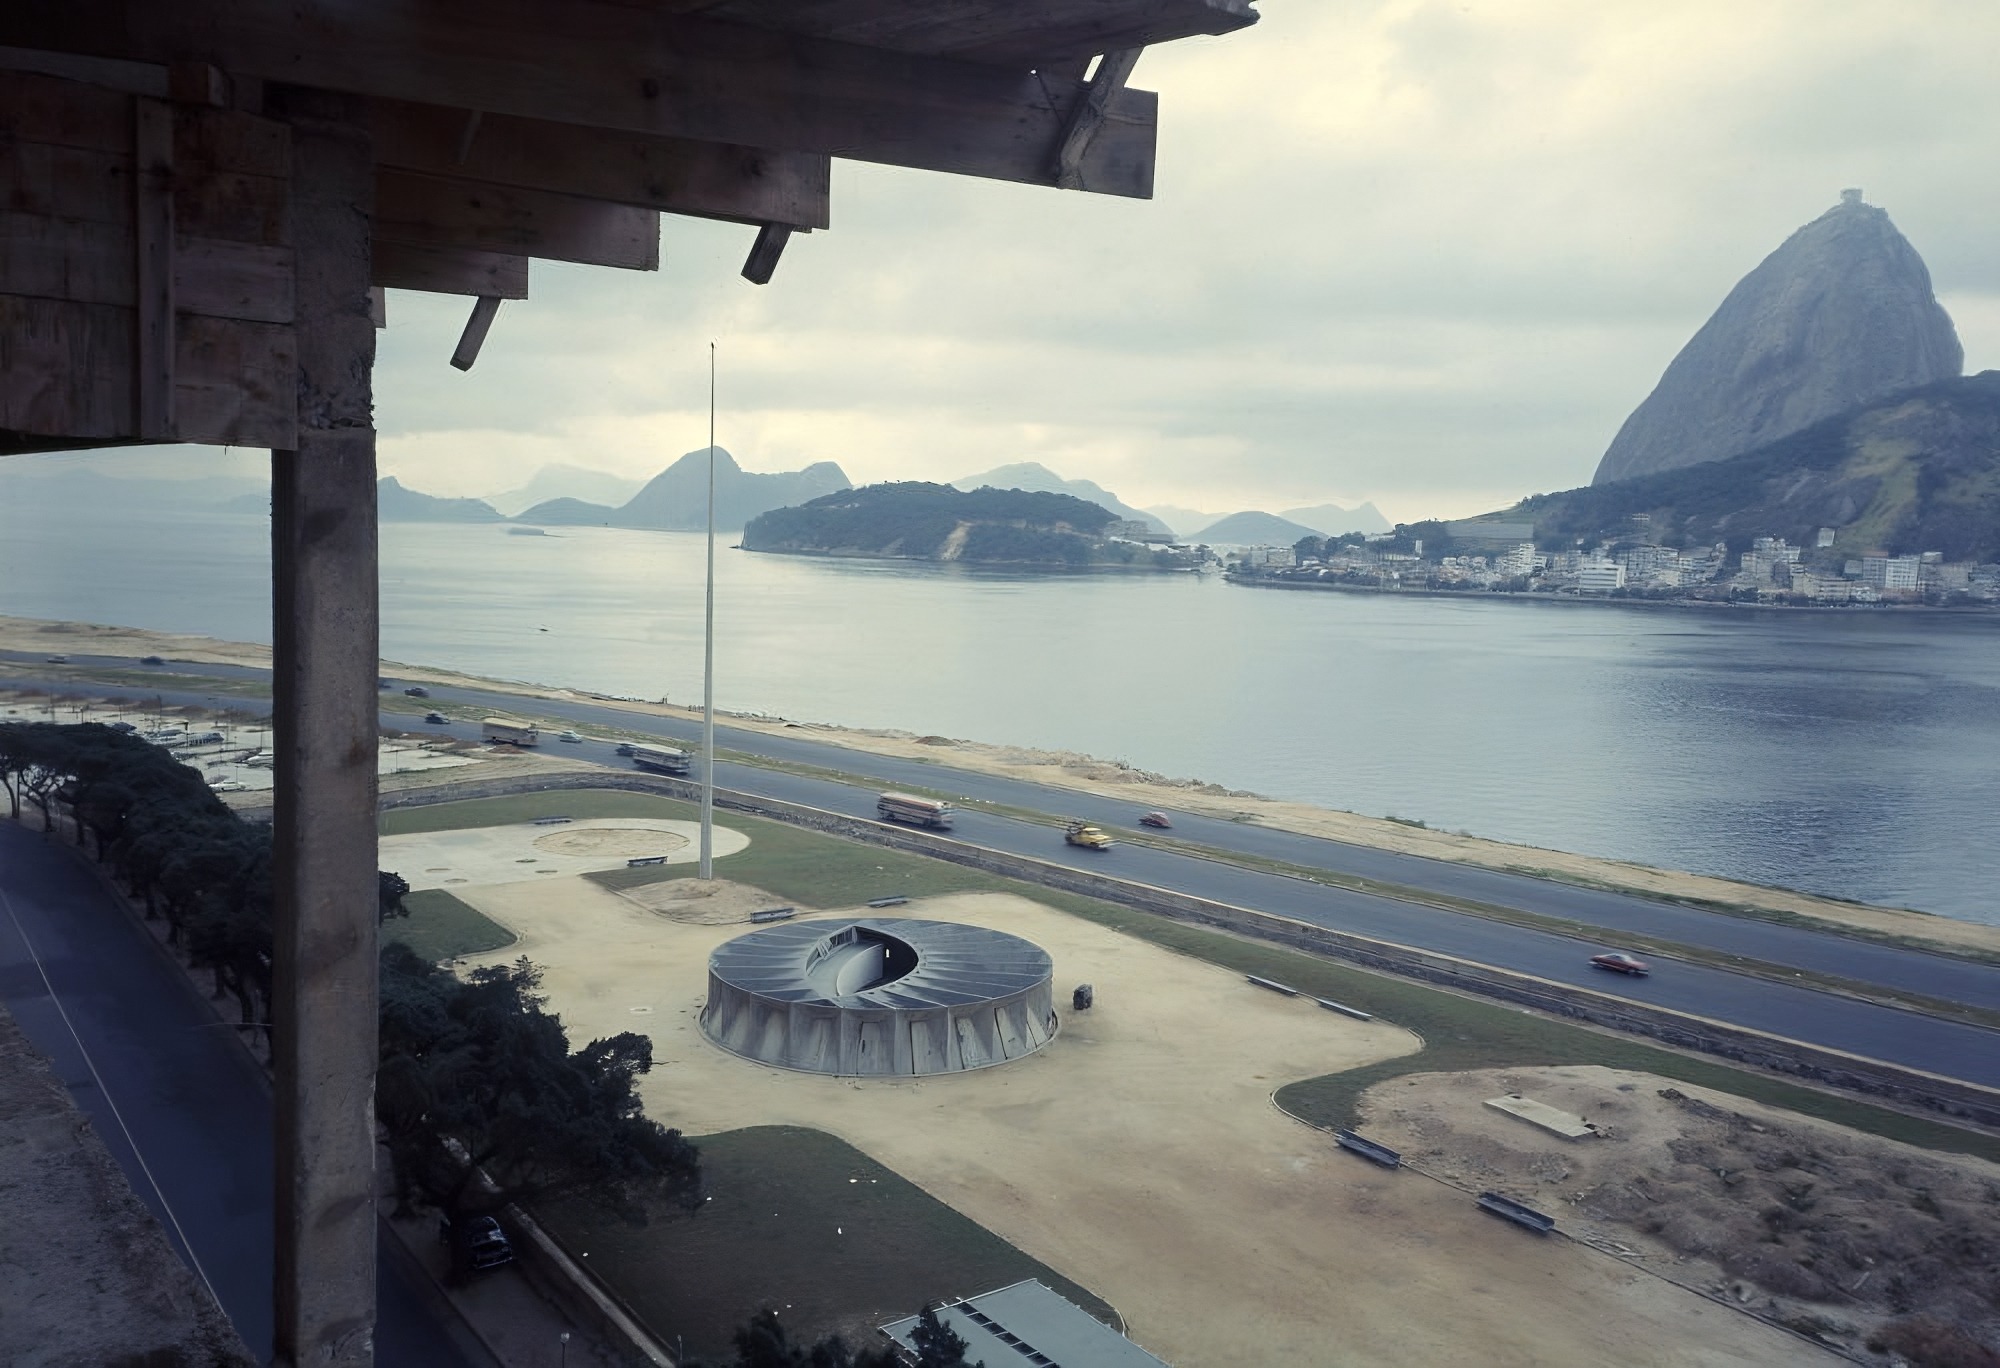 Flamingo Park, Rio de Janeiro, looking down on the Carmen Miranda Musuem. Photo: Tim Benton, 1990. Source: RIBA. The Carmen Miranda Museum was created in 1956, but not inaugurated until 1976. Initially it was a leisure centre designed by Affonso Eduardo Reidy, but was adapted for musuem use in 1975 by the architect Ulysses Petronio Burlamaqui.